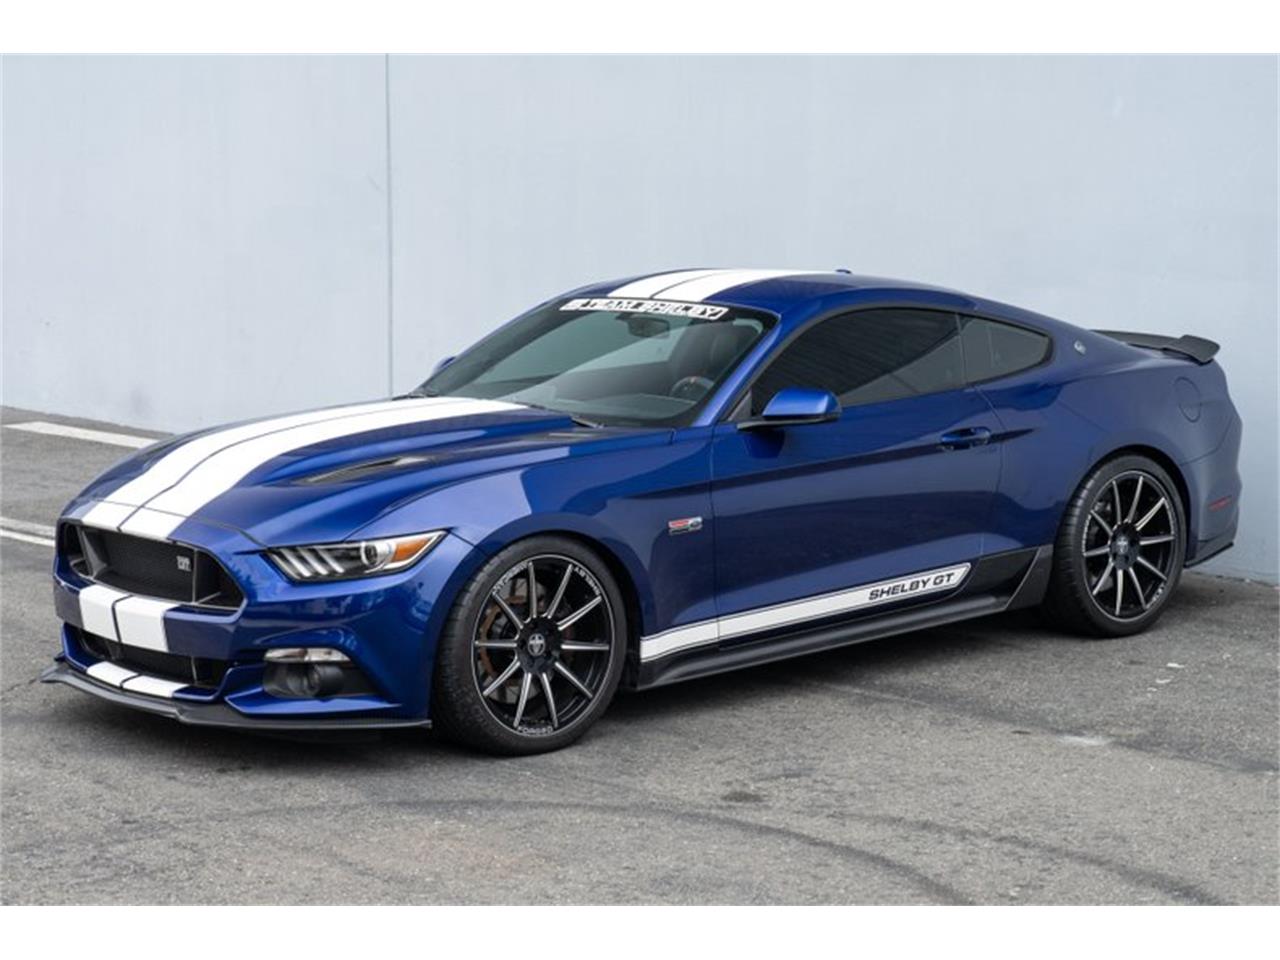 For Sale: 2015 Shelby Mustang in Irvine, California for sale in Irvine, CA